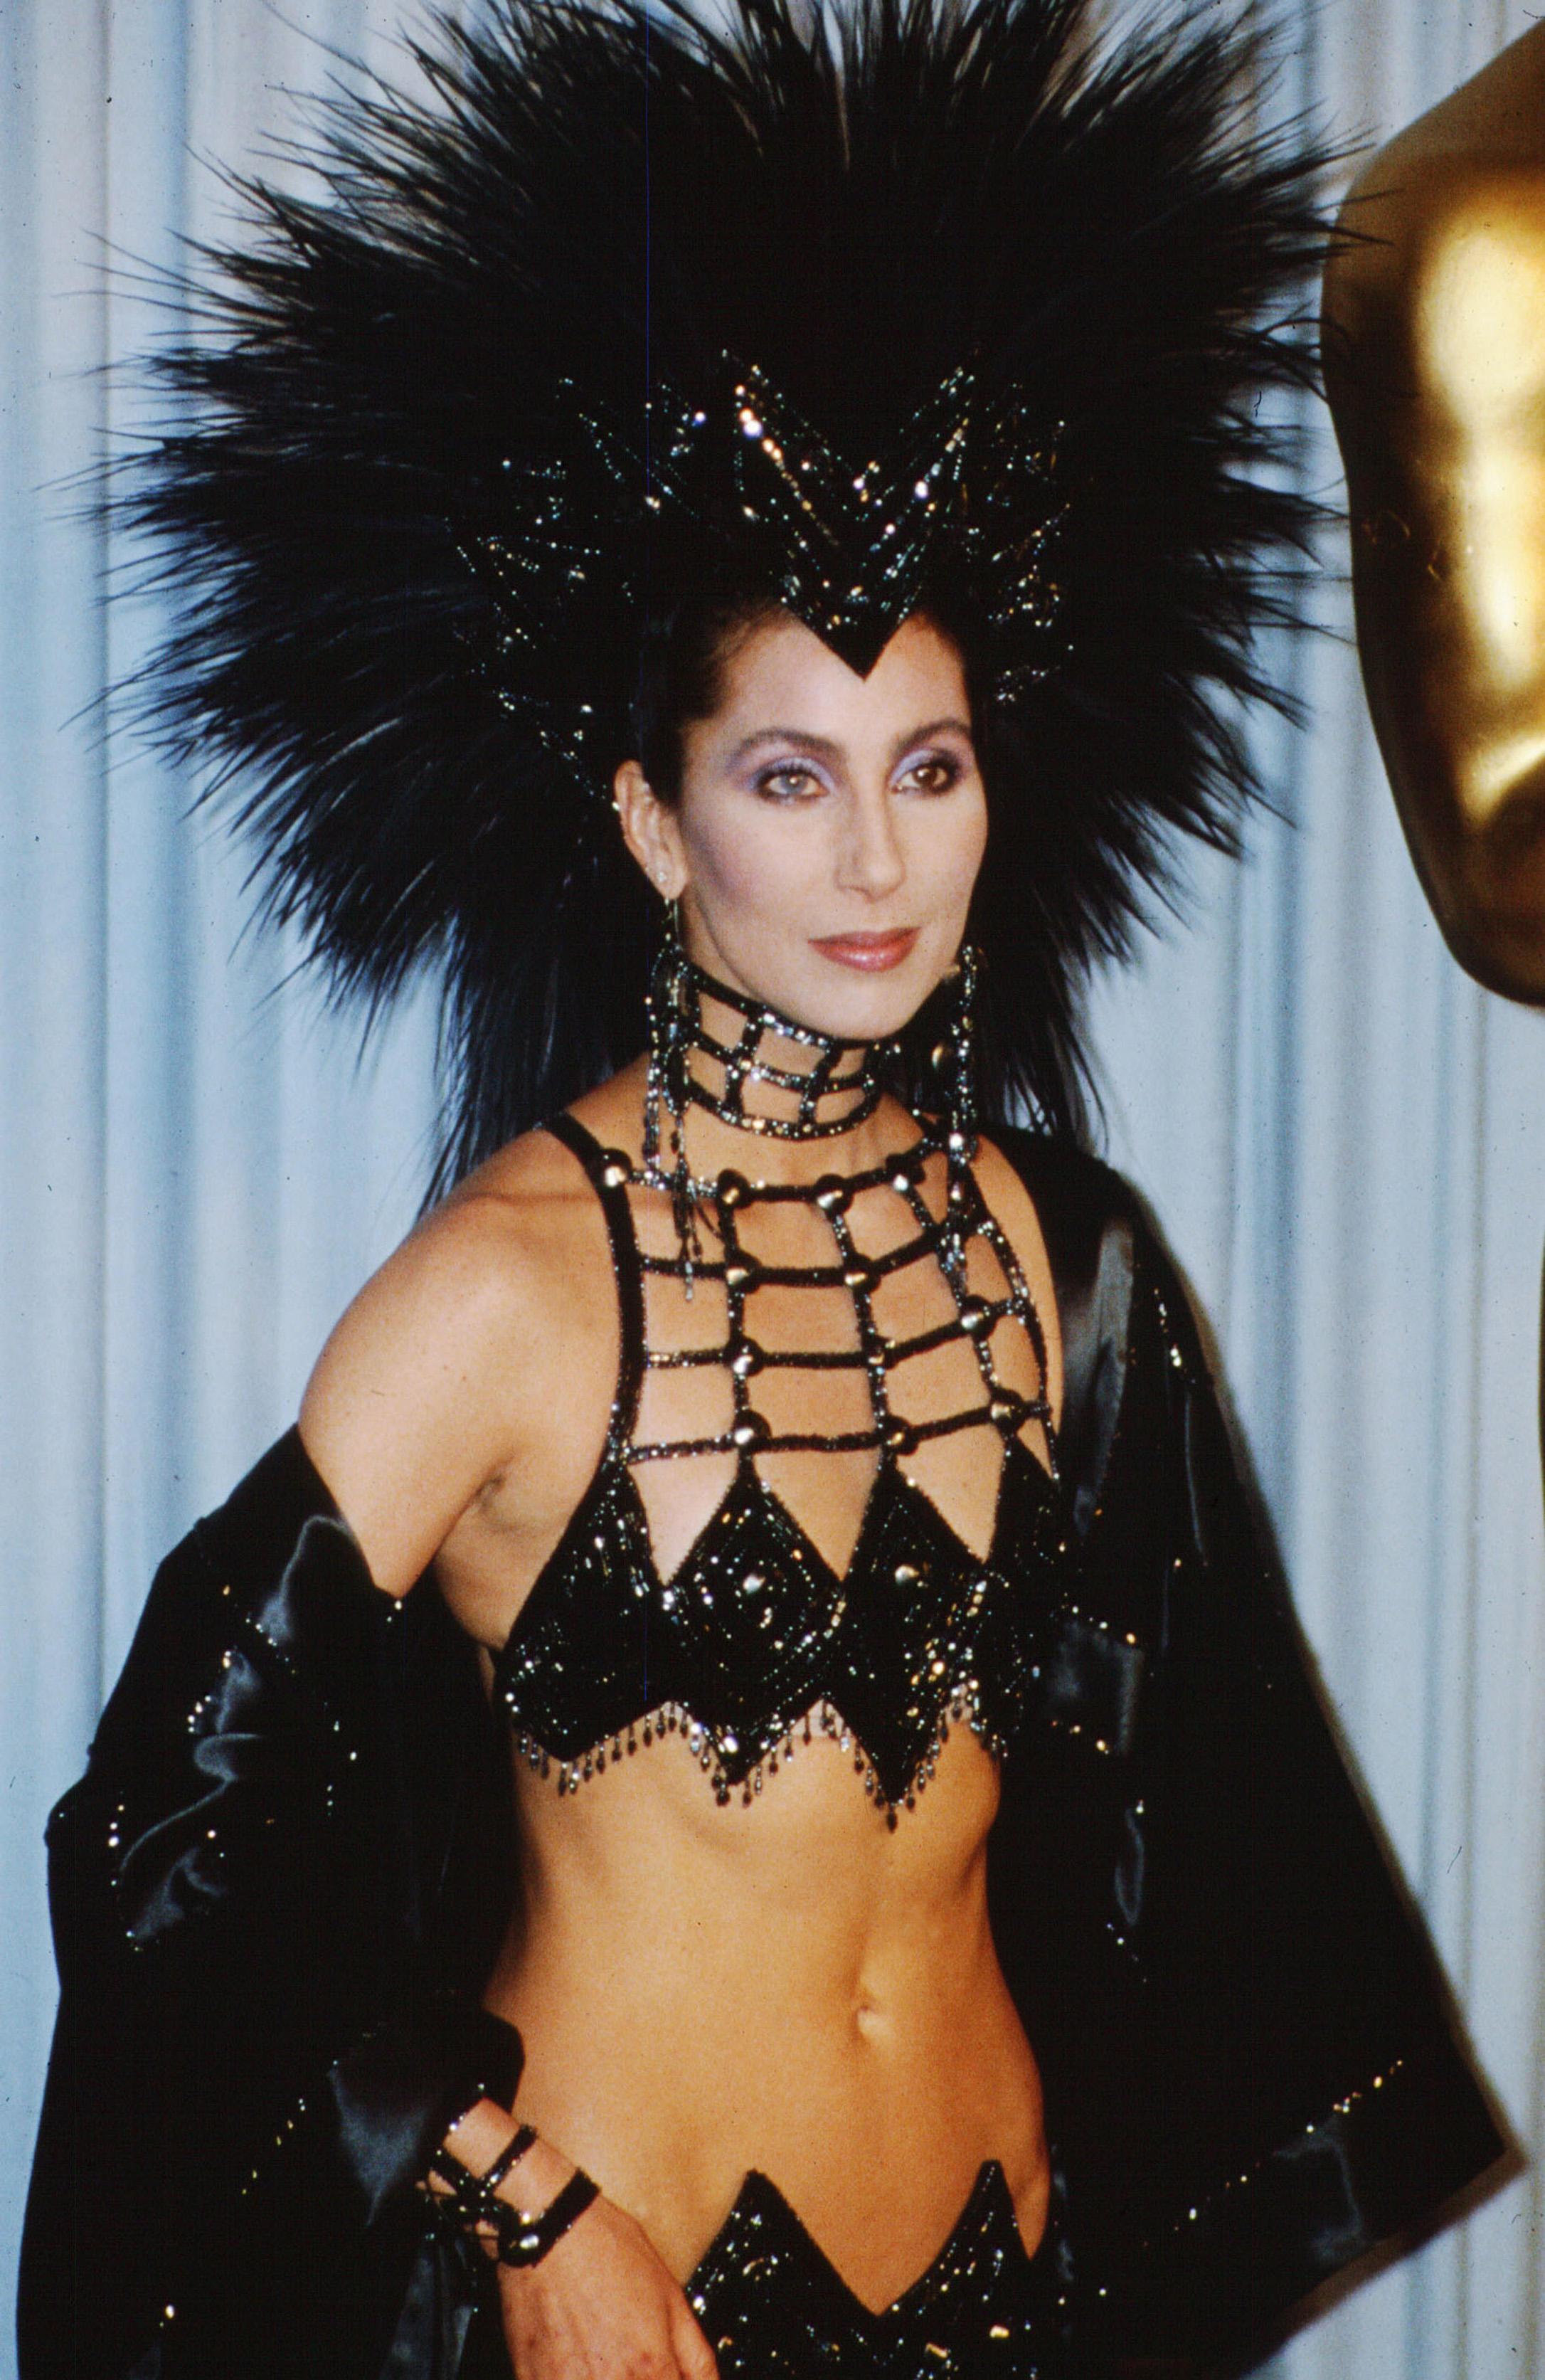 Cher at the 1986 Oscars